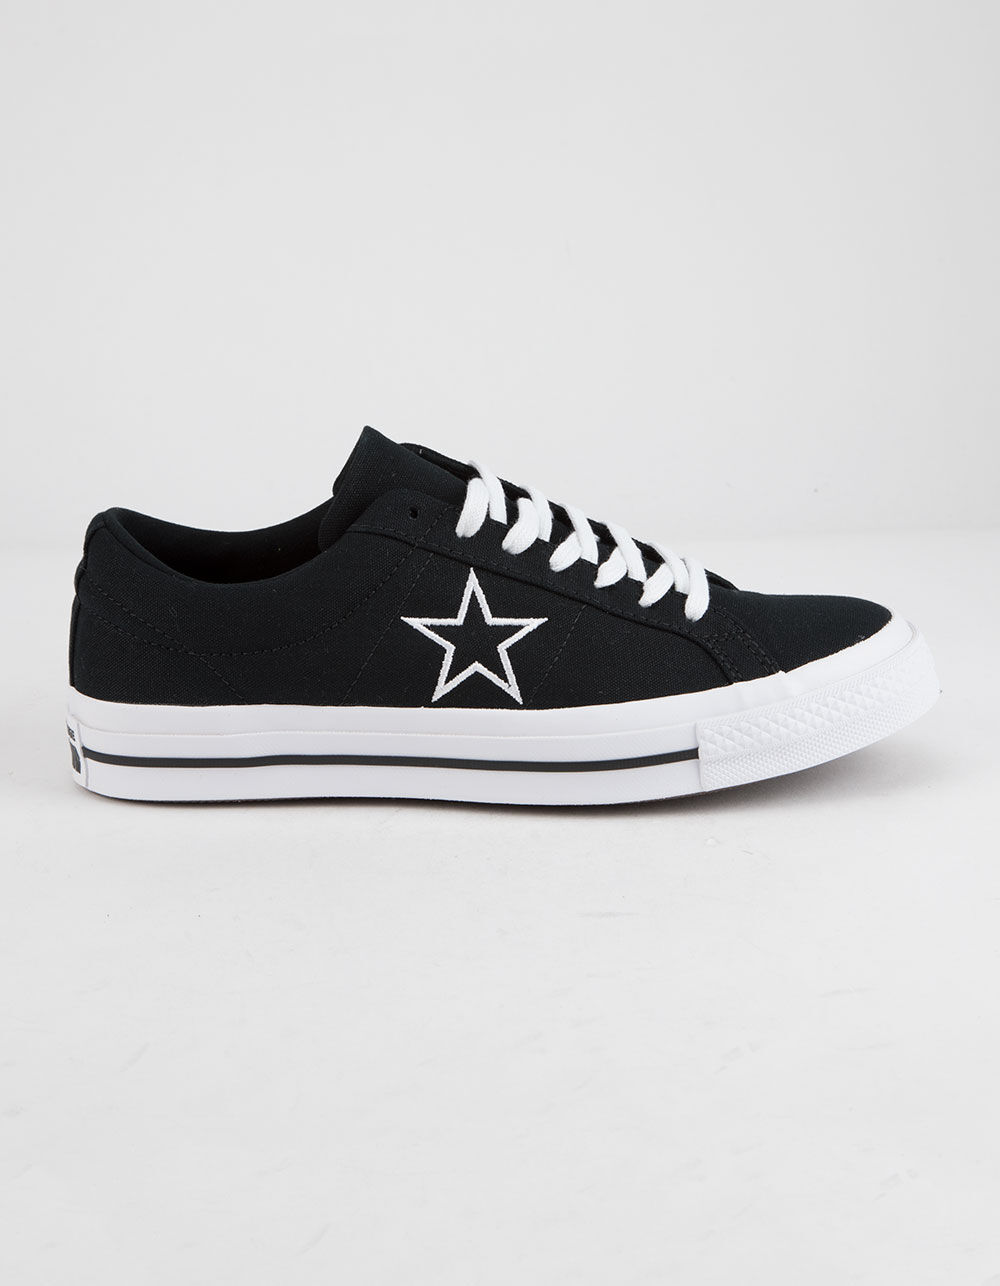 CONVERSE One Star Ox Black & White Low Top Shoes image number 0